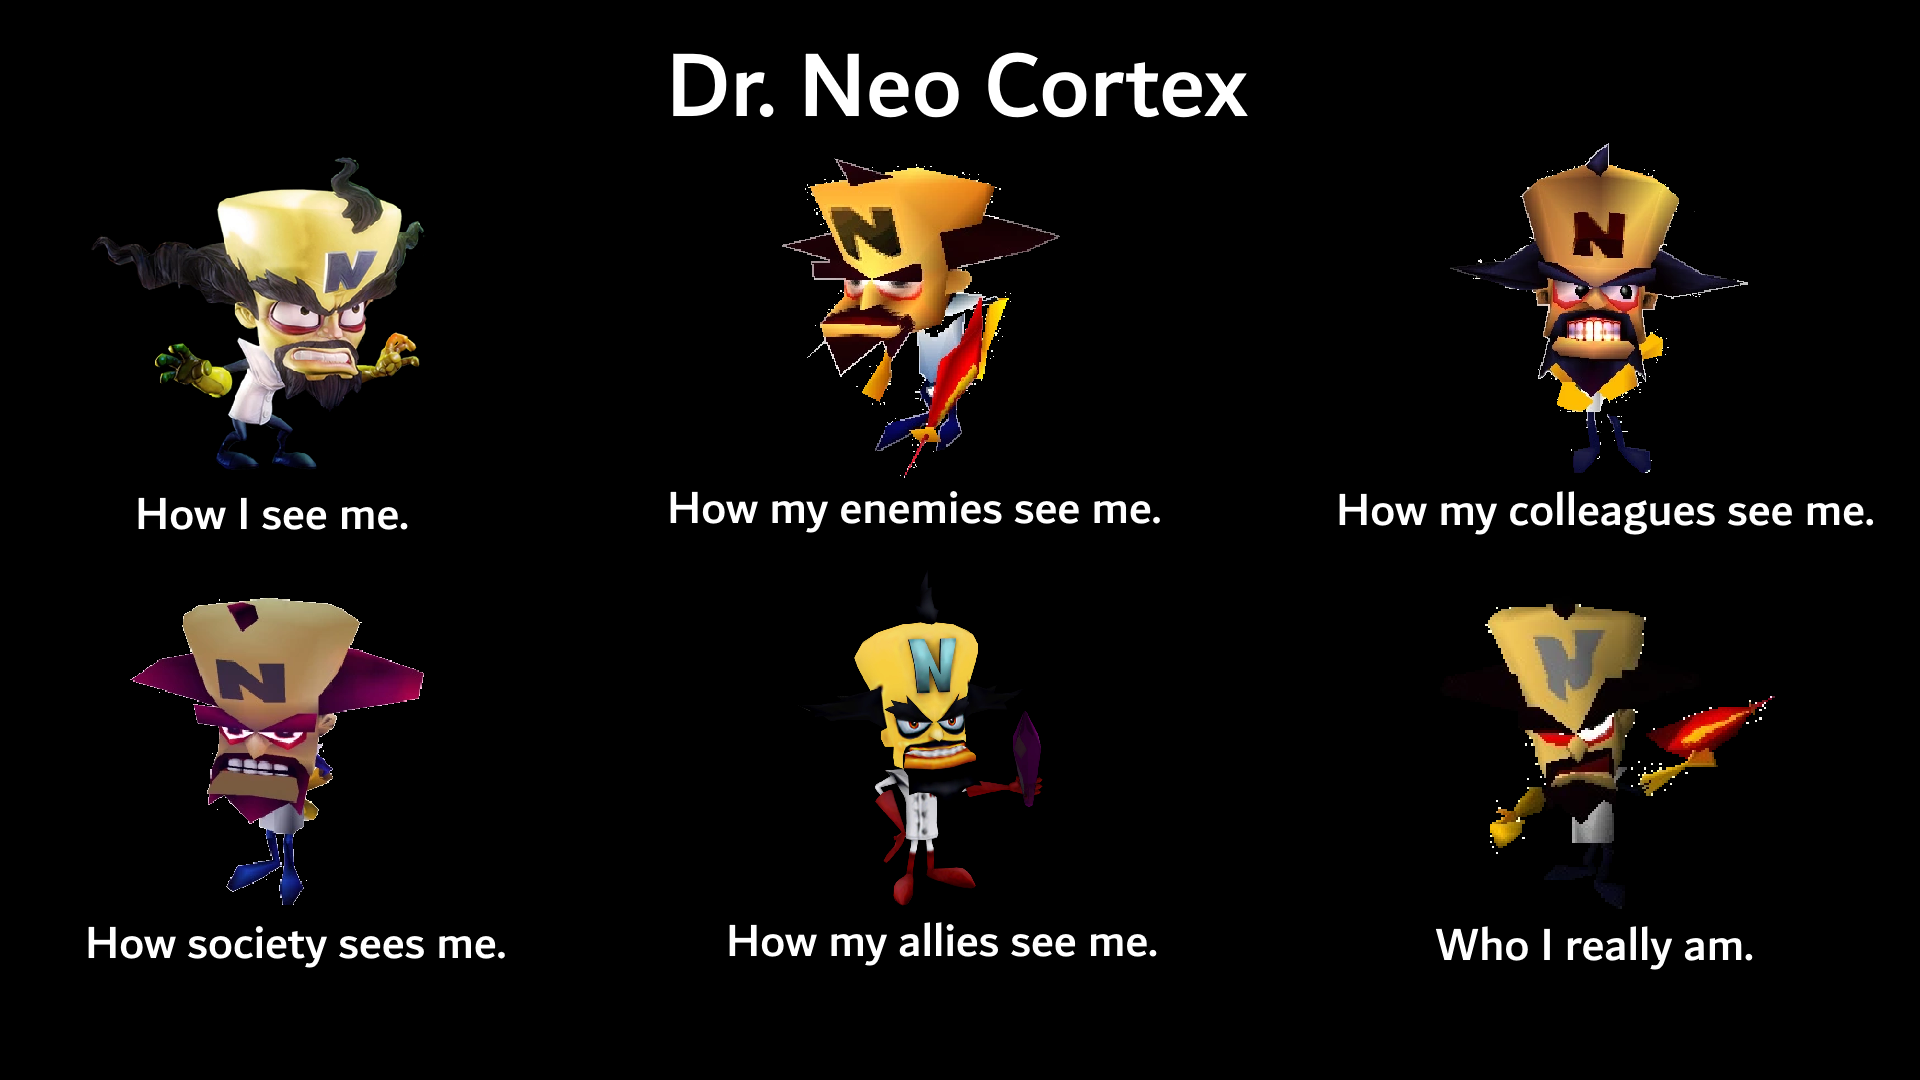 The many faces of Dr. Neo Cortex